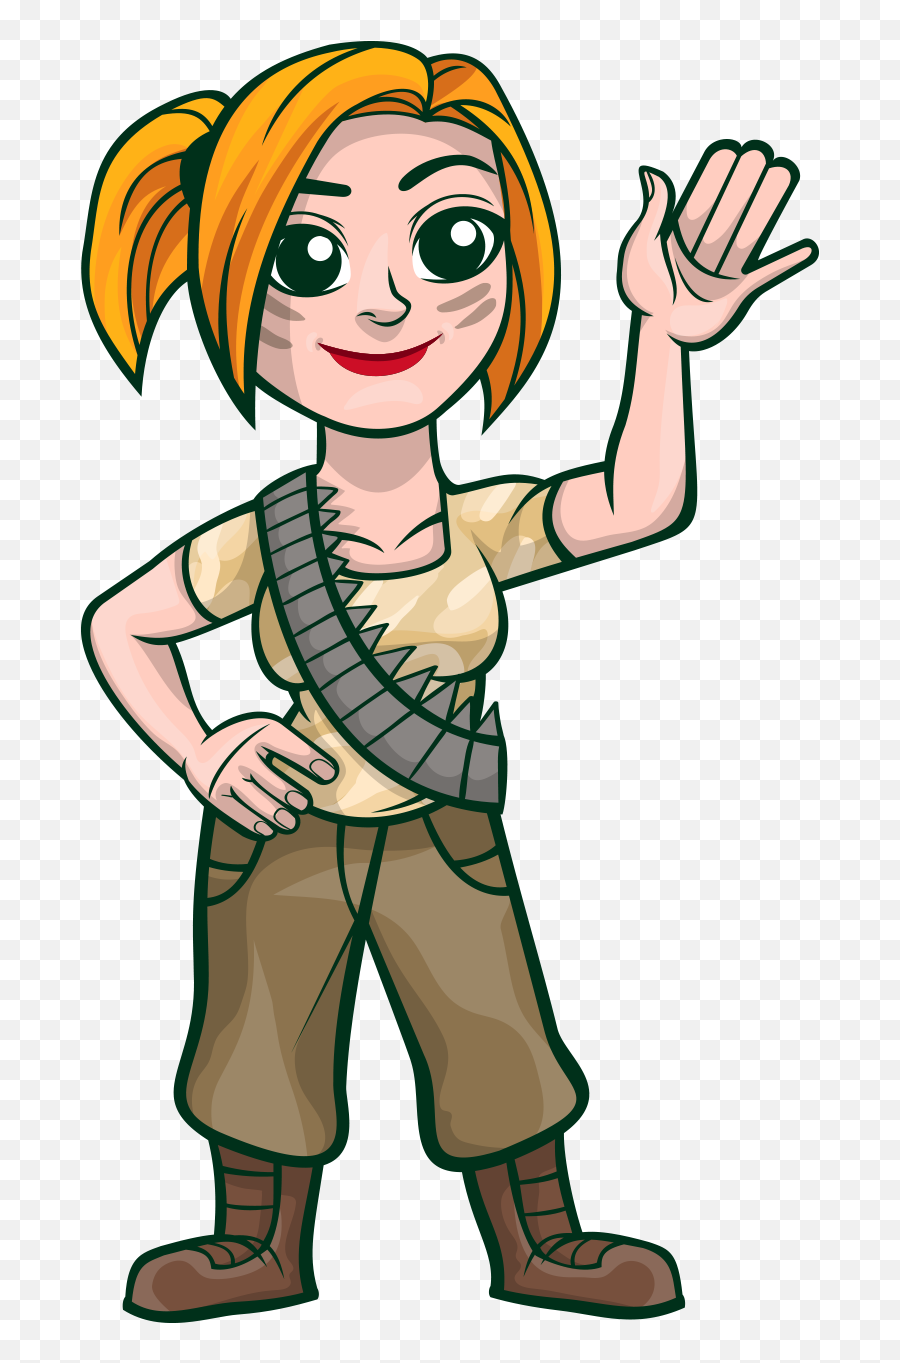 Soldier Free To Use Cliparts 2 - Clipartingcom Soldier Woman Cartoon Png Emoji,Soldier Clipart